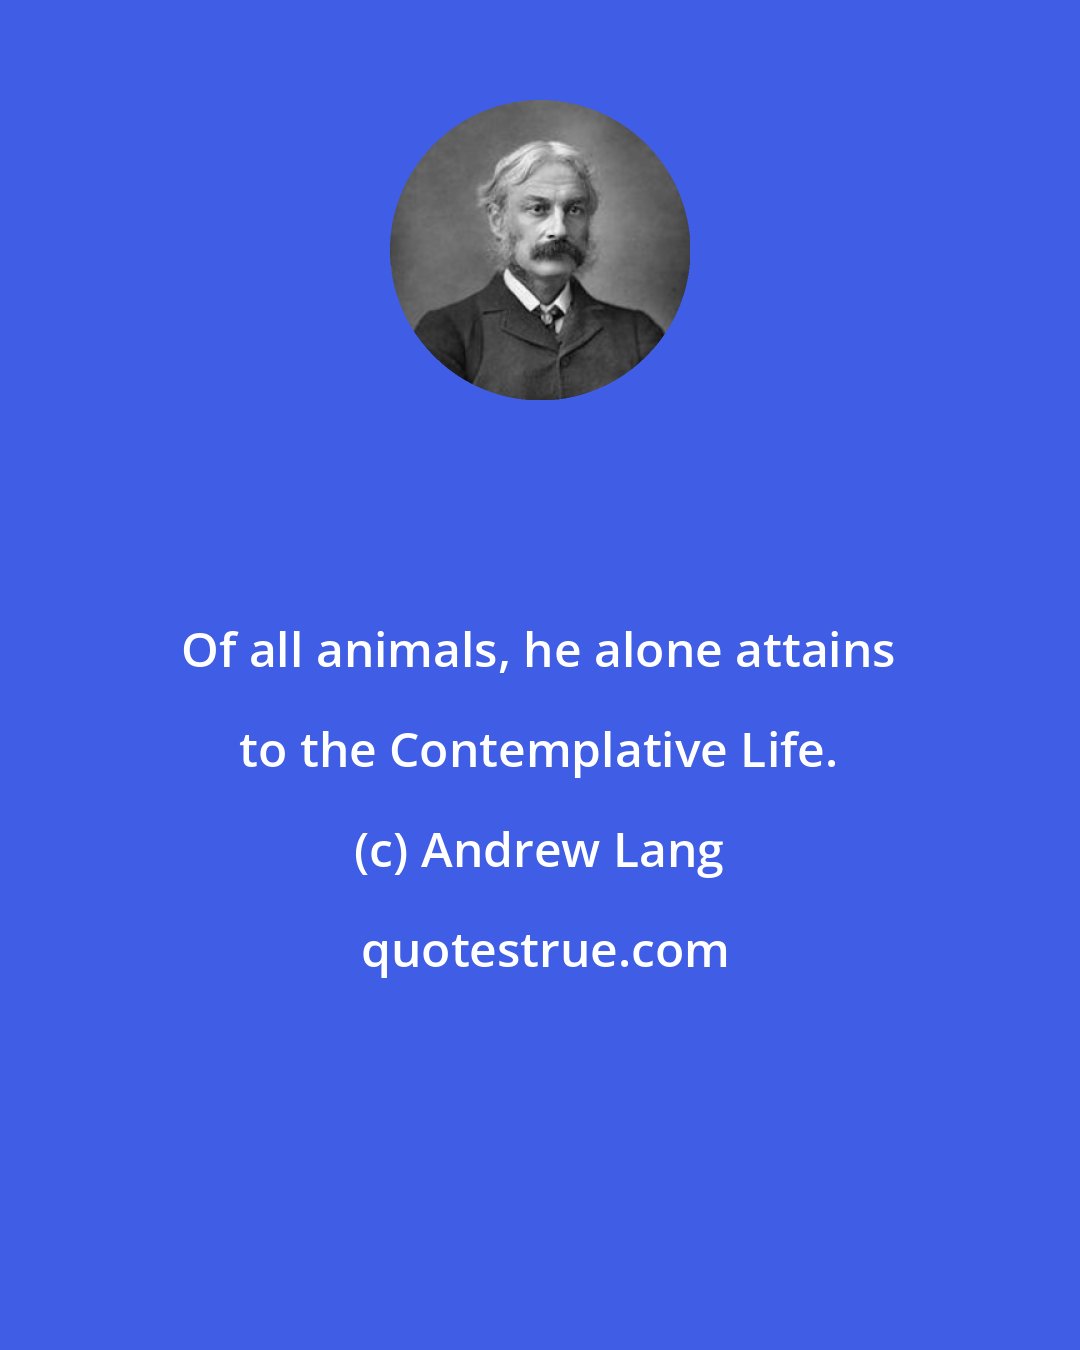 Andrew Lang: Of all animals, he alone attains to the Contemplative Life.